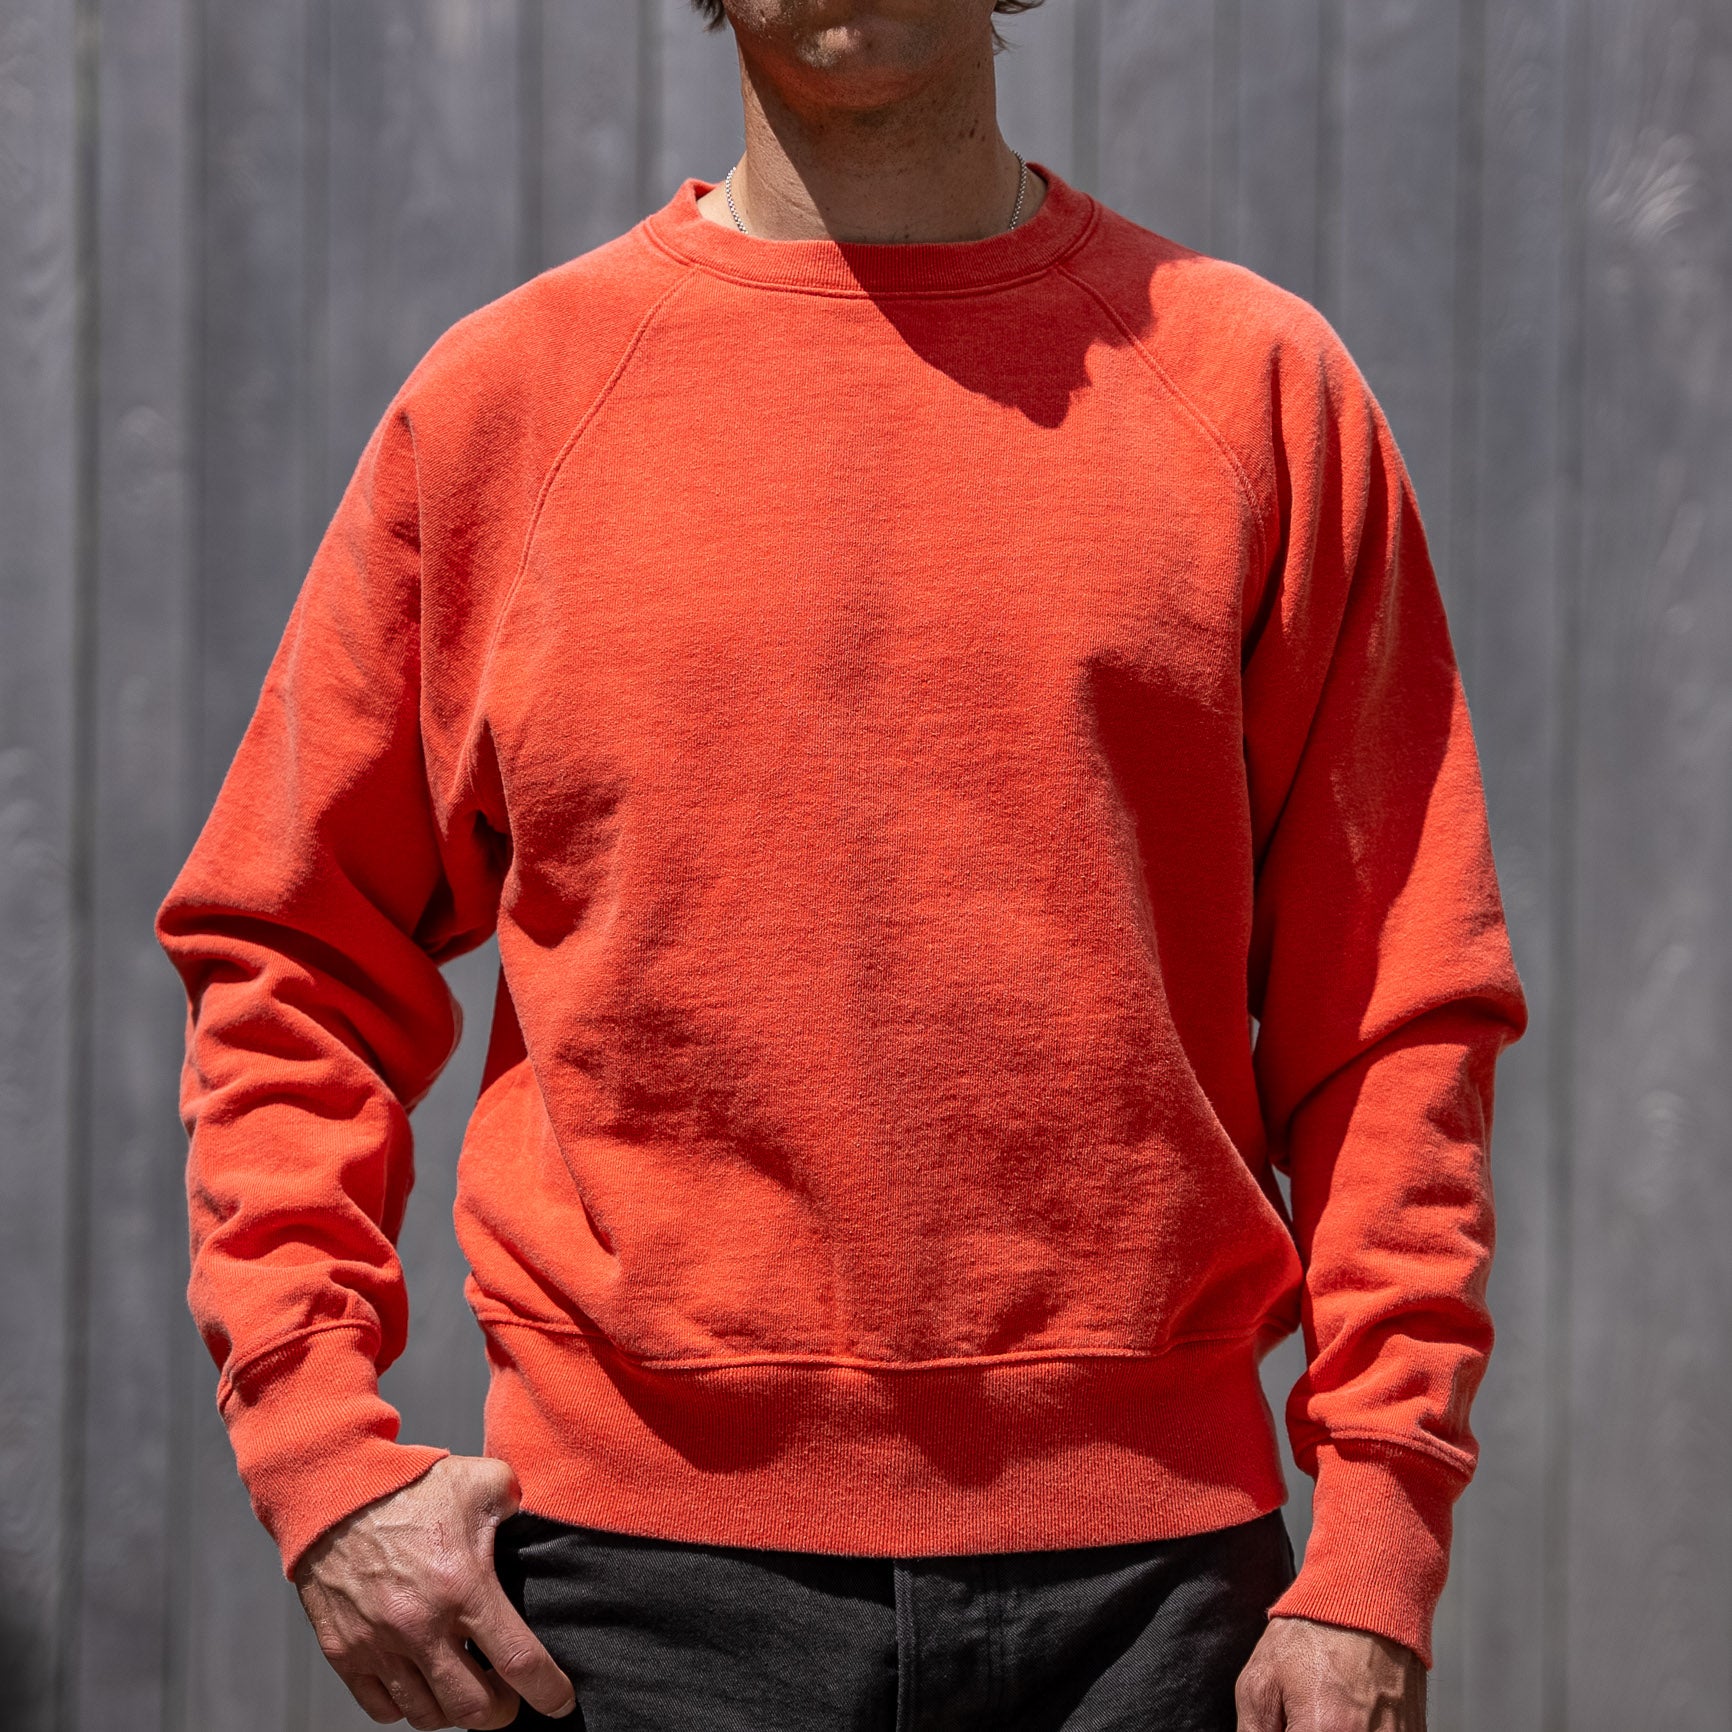 Orange Hoodie Outfits For Men (129 ideas & outfits)